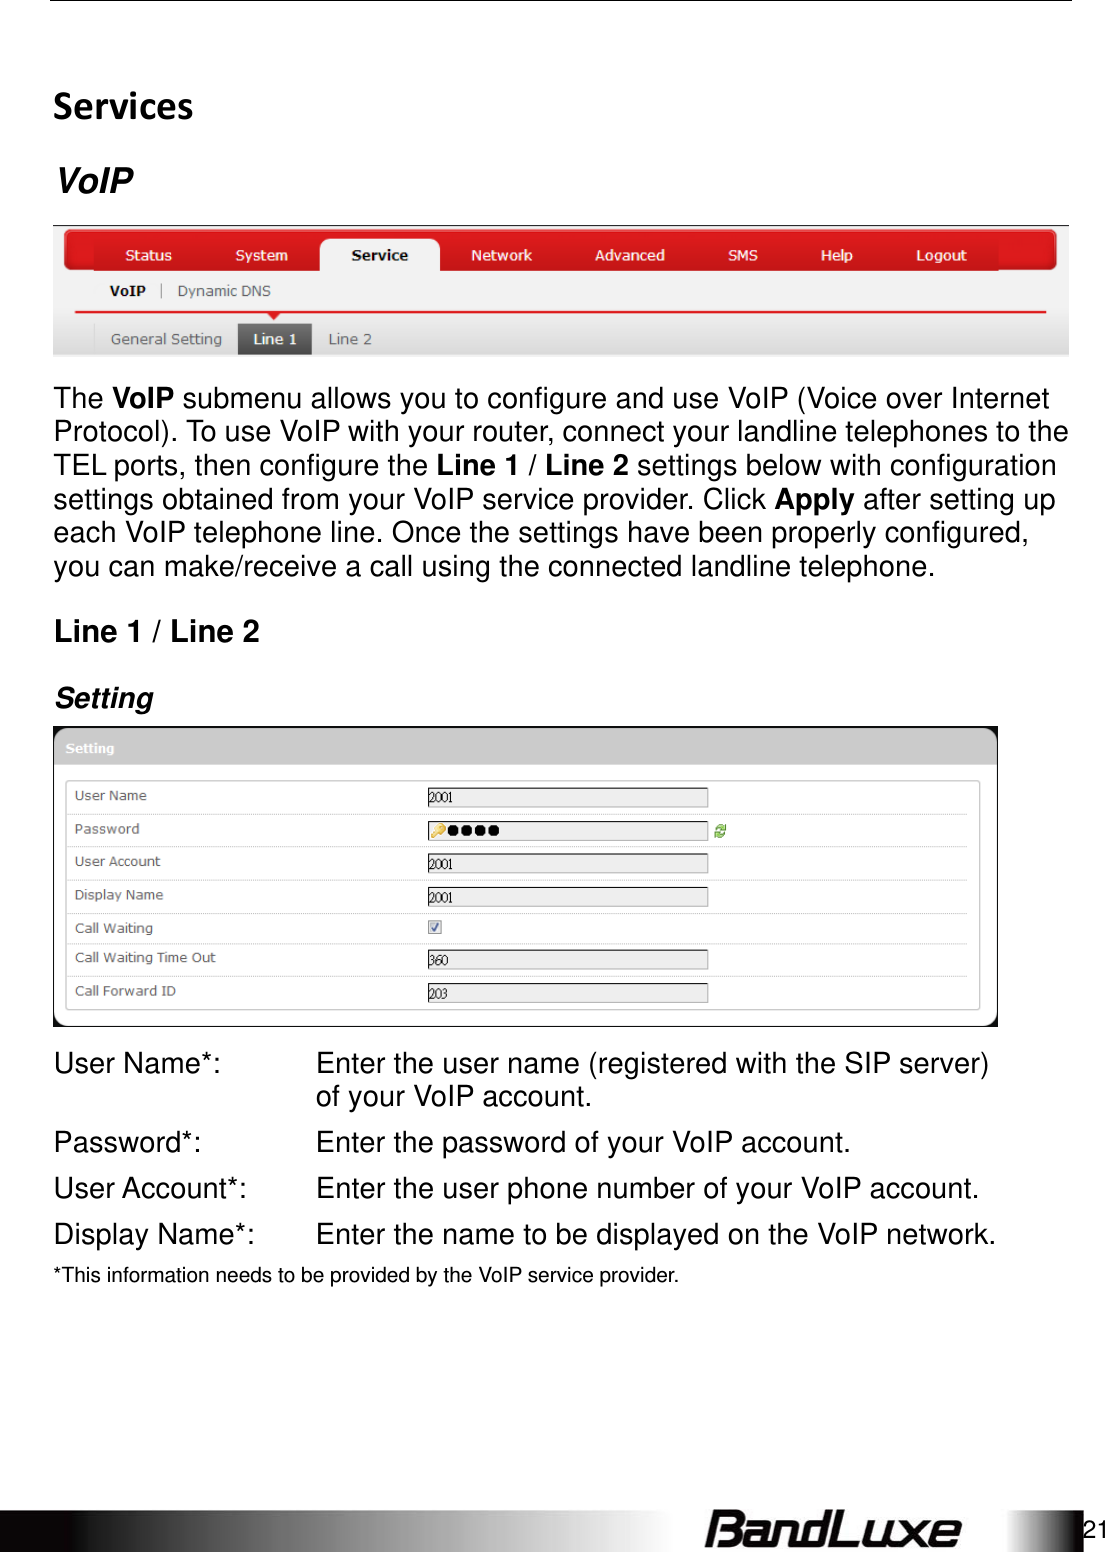   Using Web-based Management 21 Services VoIP  The VoIP submenu allows you to configure and use VoIP (Voice over Internet Protocol). To use VoIP with your router, connect your landline telephones to the TEL ports, then configure the Line 1 / Line 2 settings below with configuration settings obtained from your VoIP service provider. Click Apply after setting up each VoIP telephone line. Once the settings have been properly configured, you can make/receive a call using the connected landline telephone. Line 1 / Line 2 Setting  User Name*: Enter the user name (registered with the SIP server) of your VoIP account. Password*:  Enter the password of your VoIP account. User Account*:  Enter the user phone number of your VoIP account. Display Name*:  Enter the name to be displayed on the VoIP network.*This information needs to be provided by the VoIP service provider.